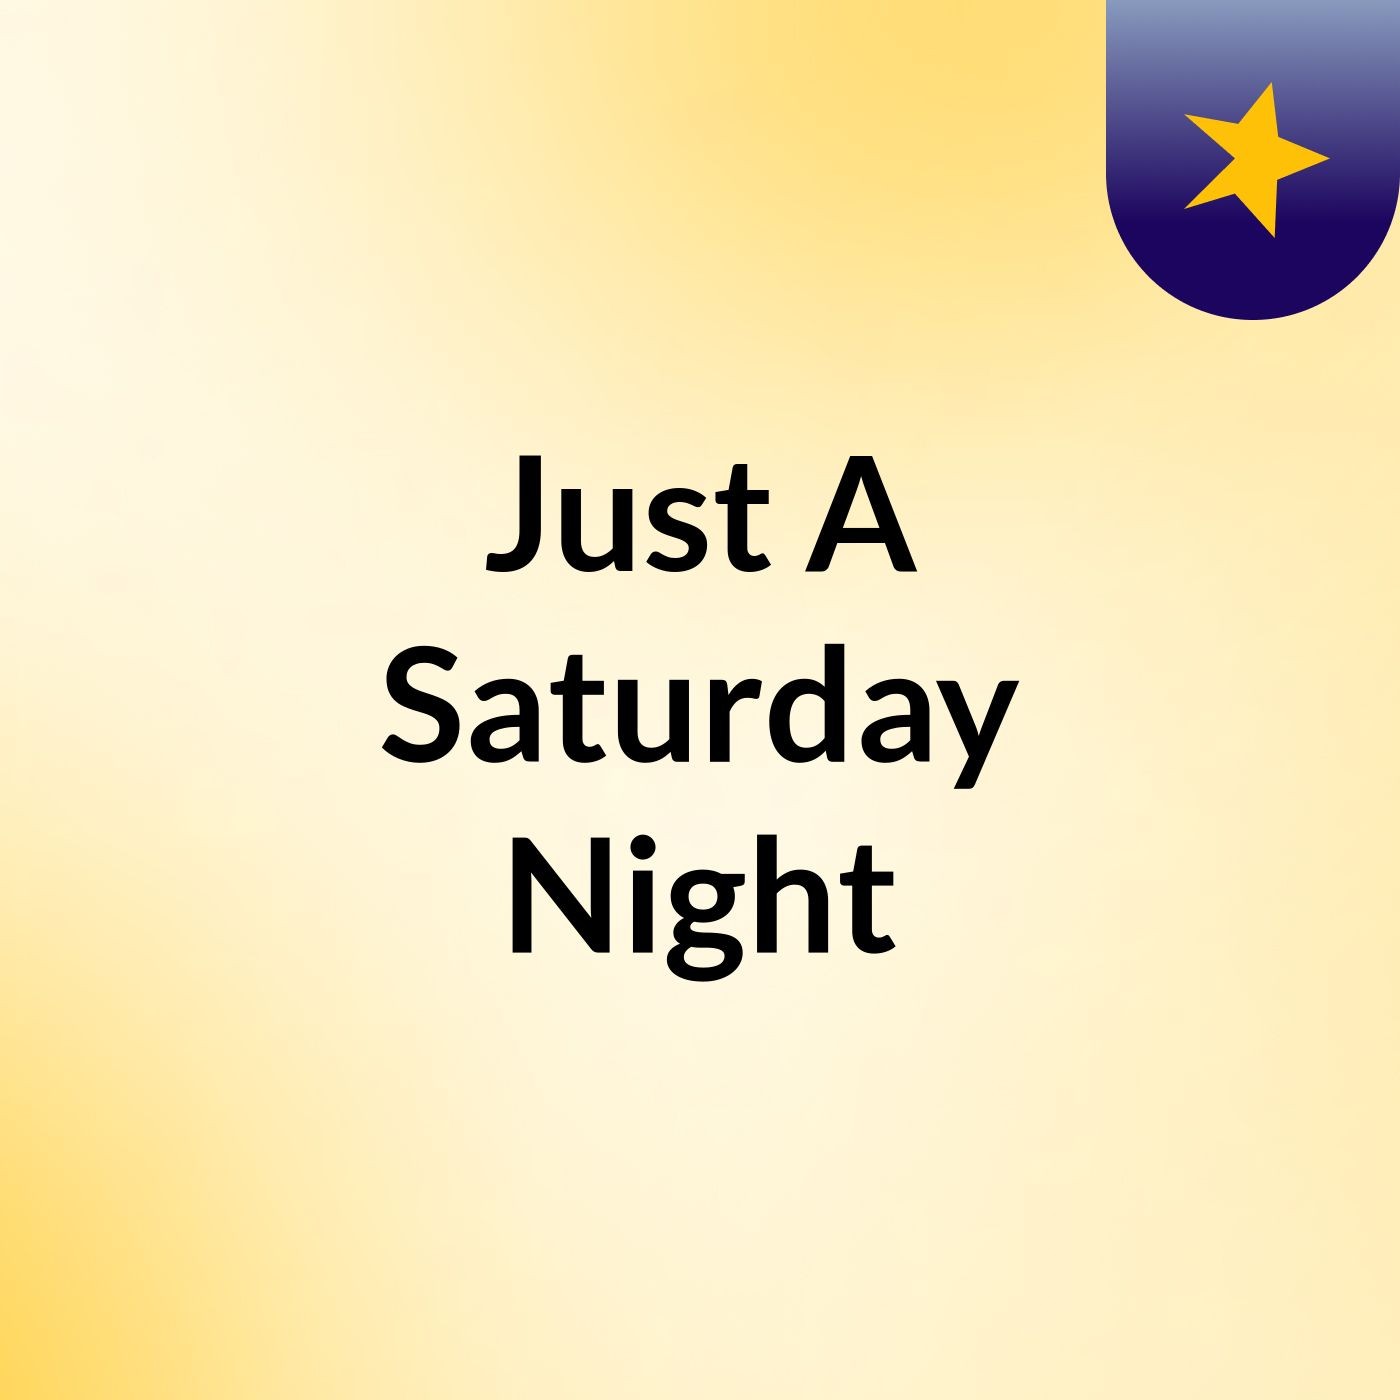 Episode 4 - Just A Saturday Night